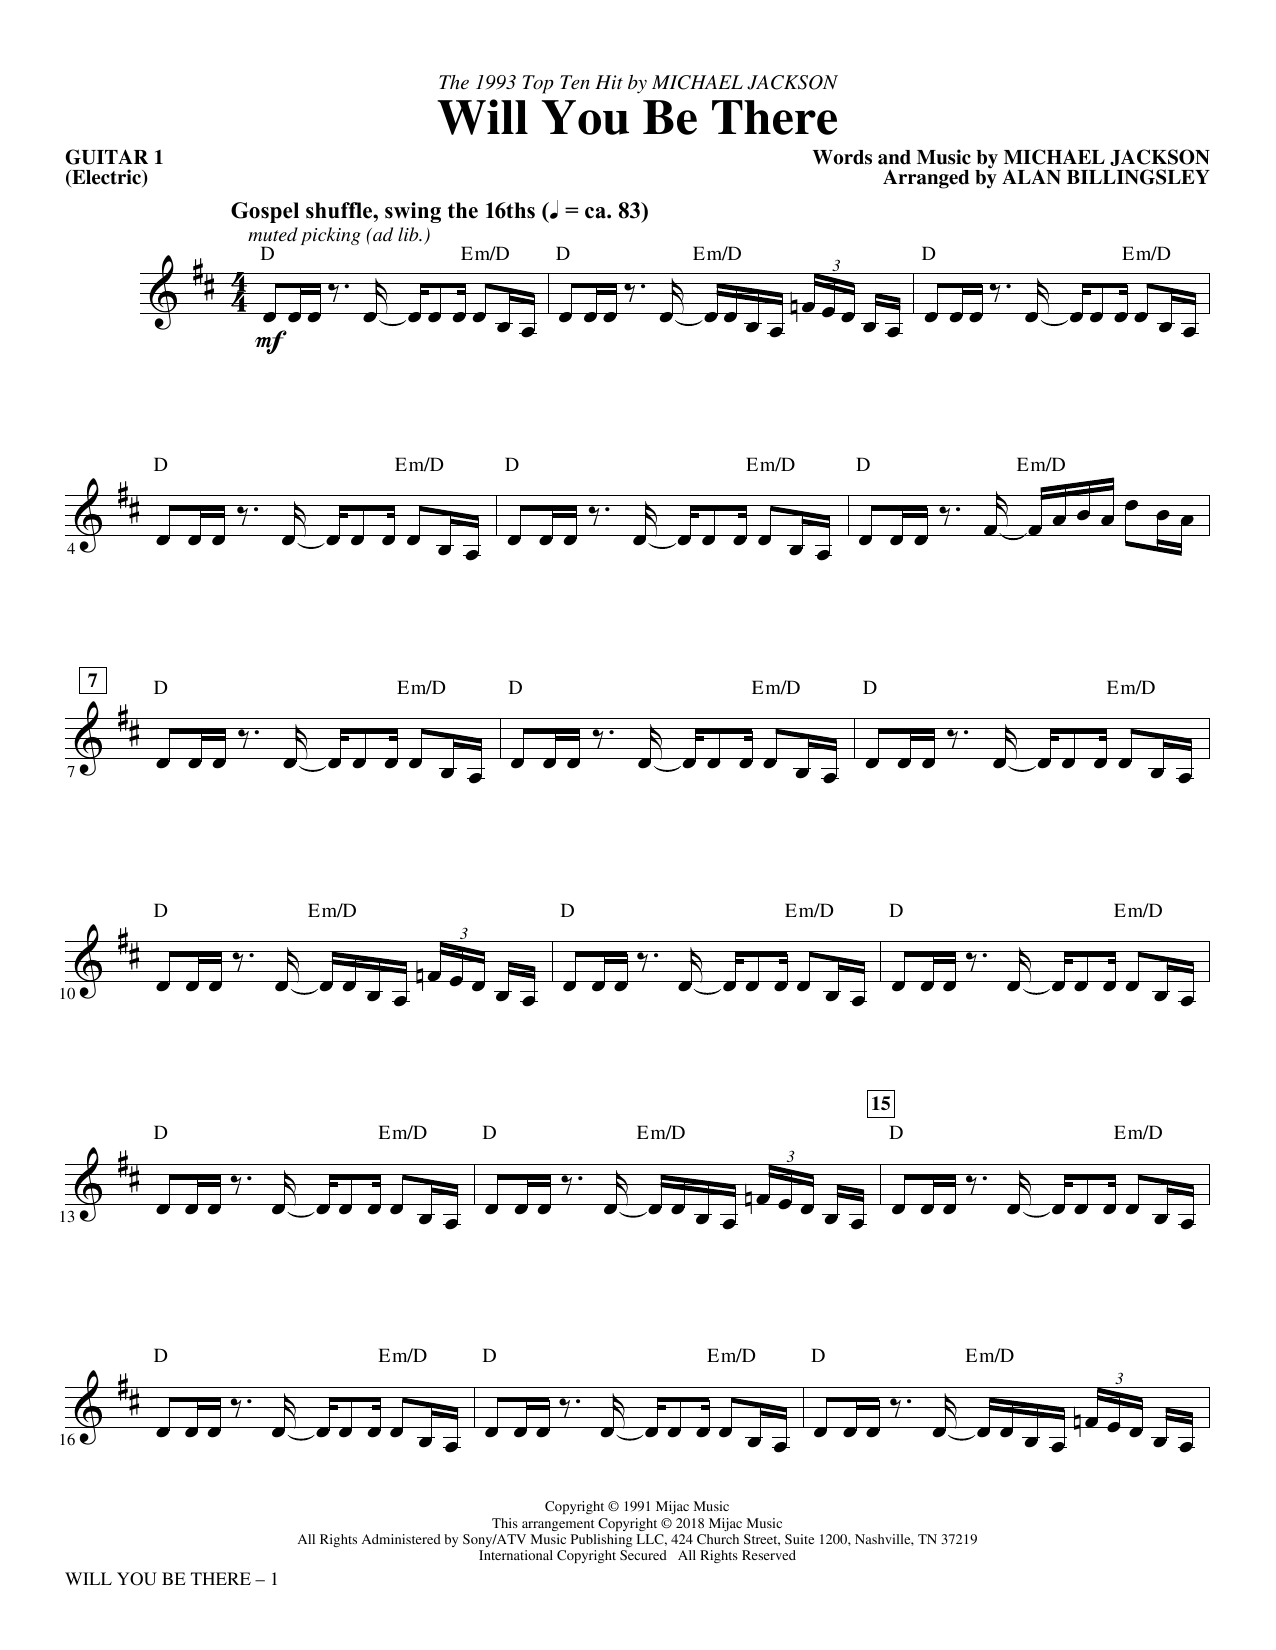 Will You Be There - Electric Guitar sheet music